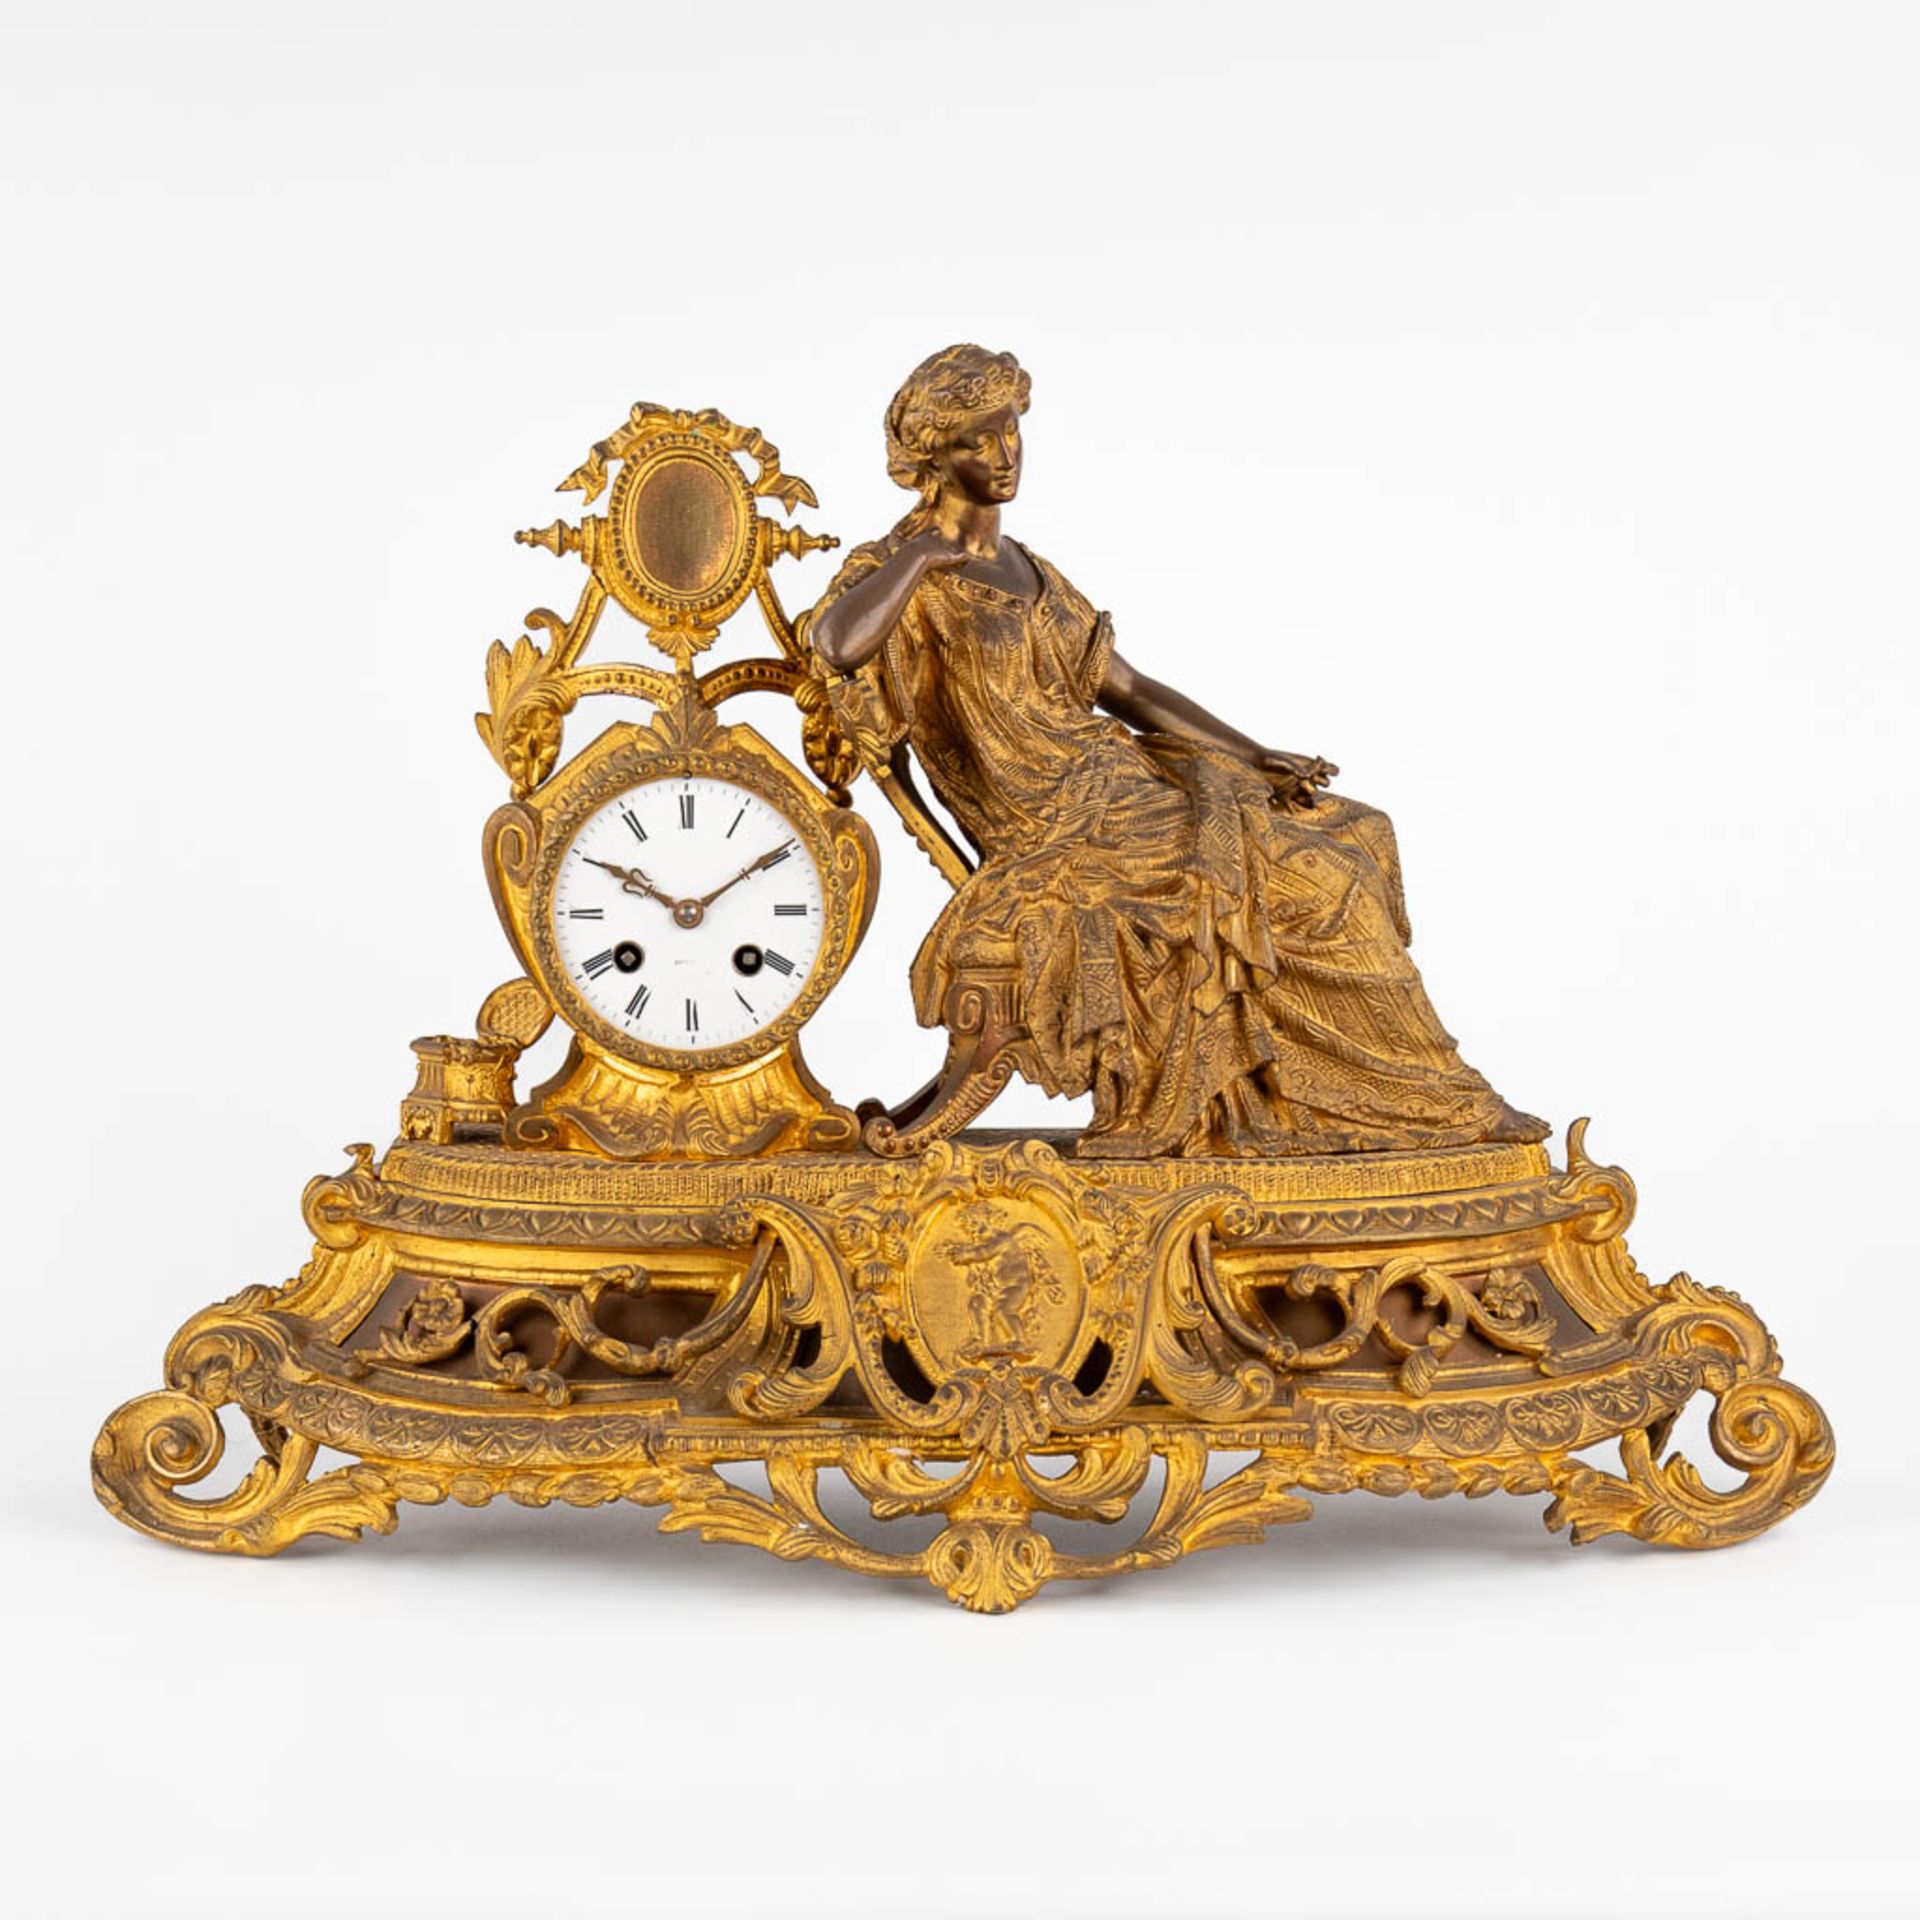 A mantle garniture clock, gilt bronze decorated with a Lady in a sofa. Late 19th C. (D:18 x W:56 x H